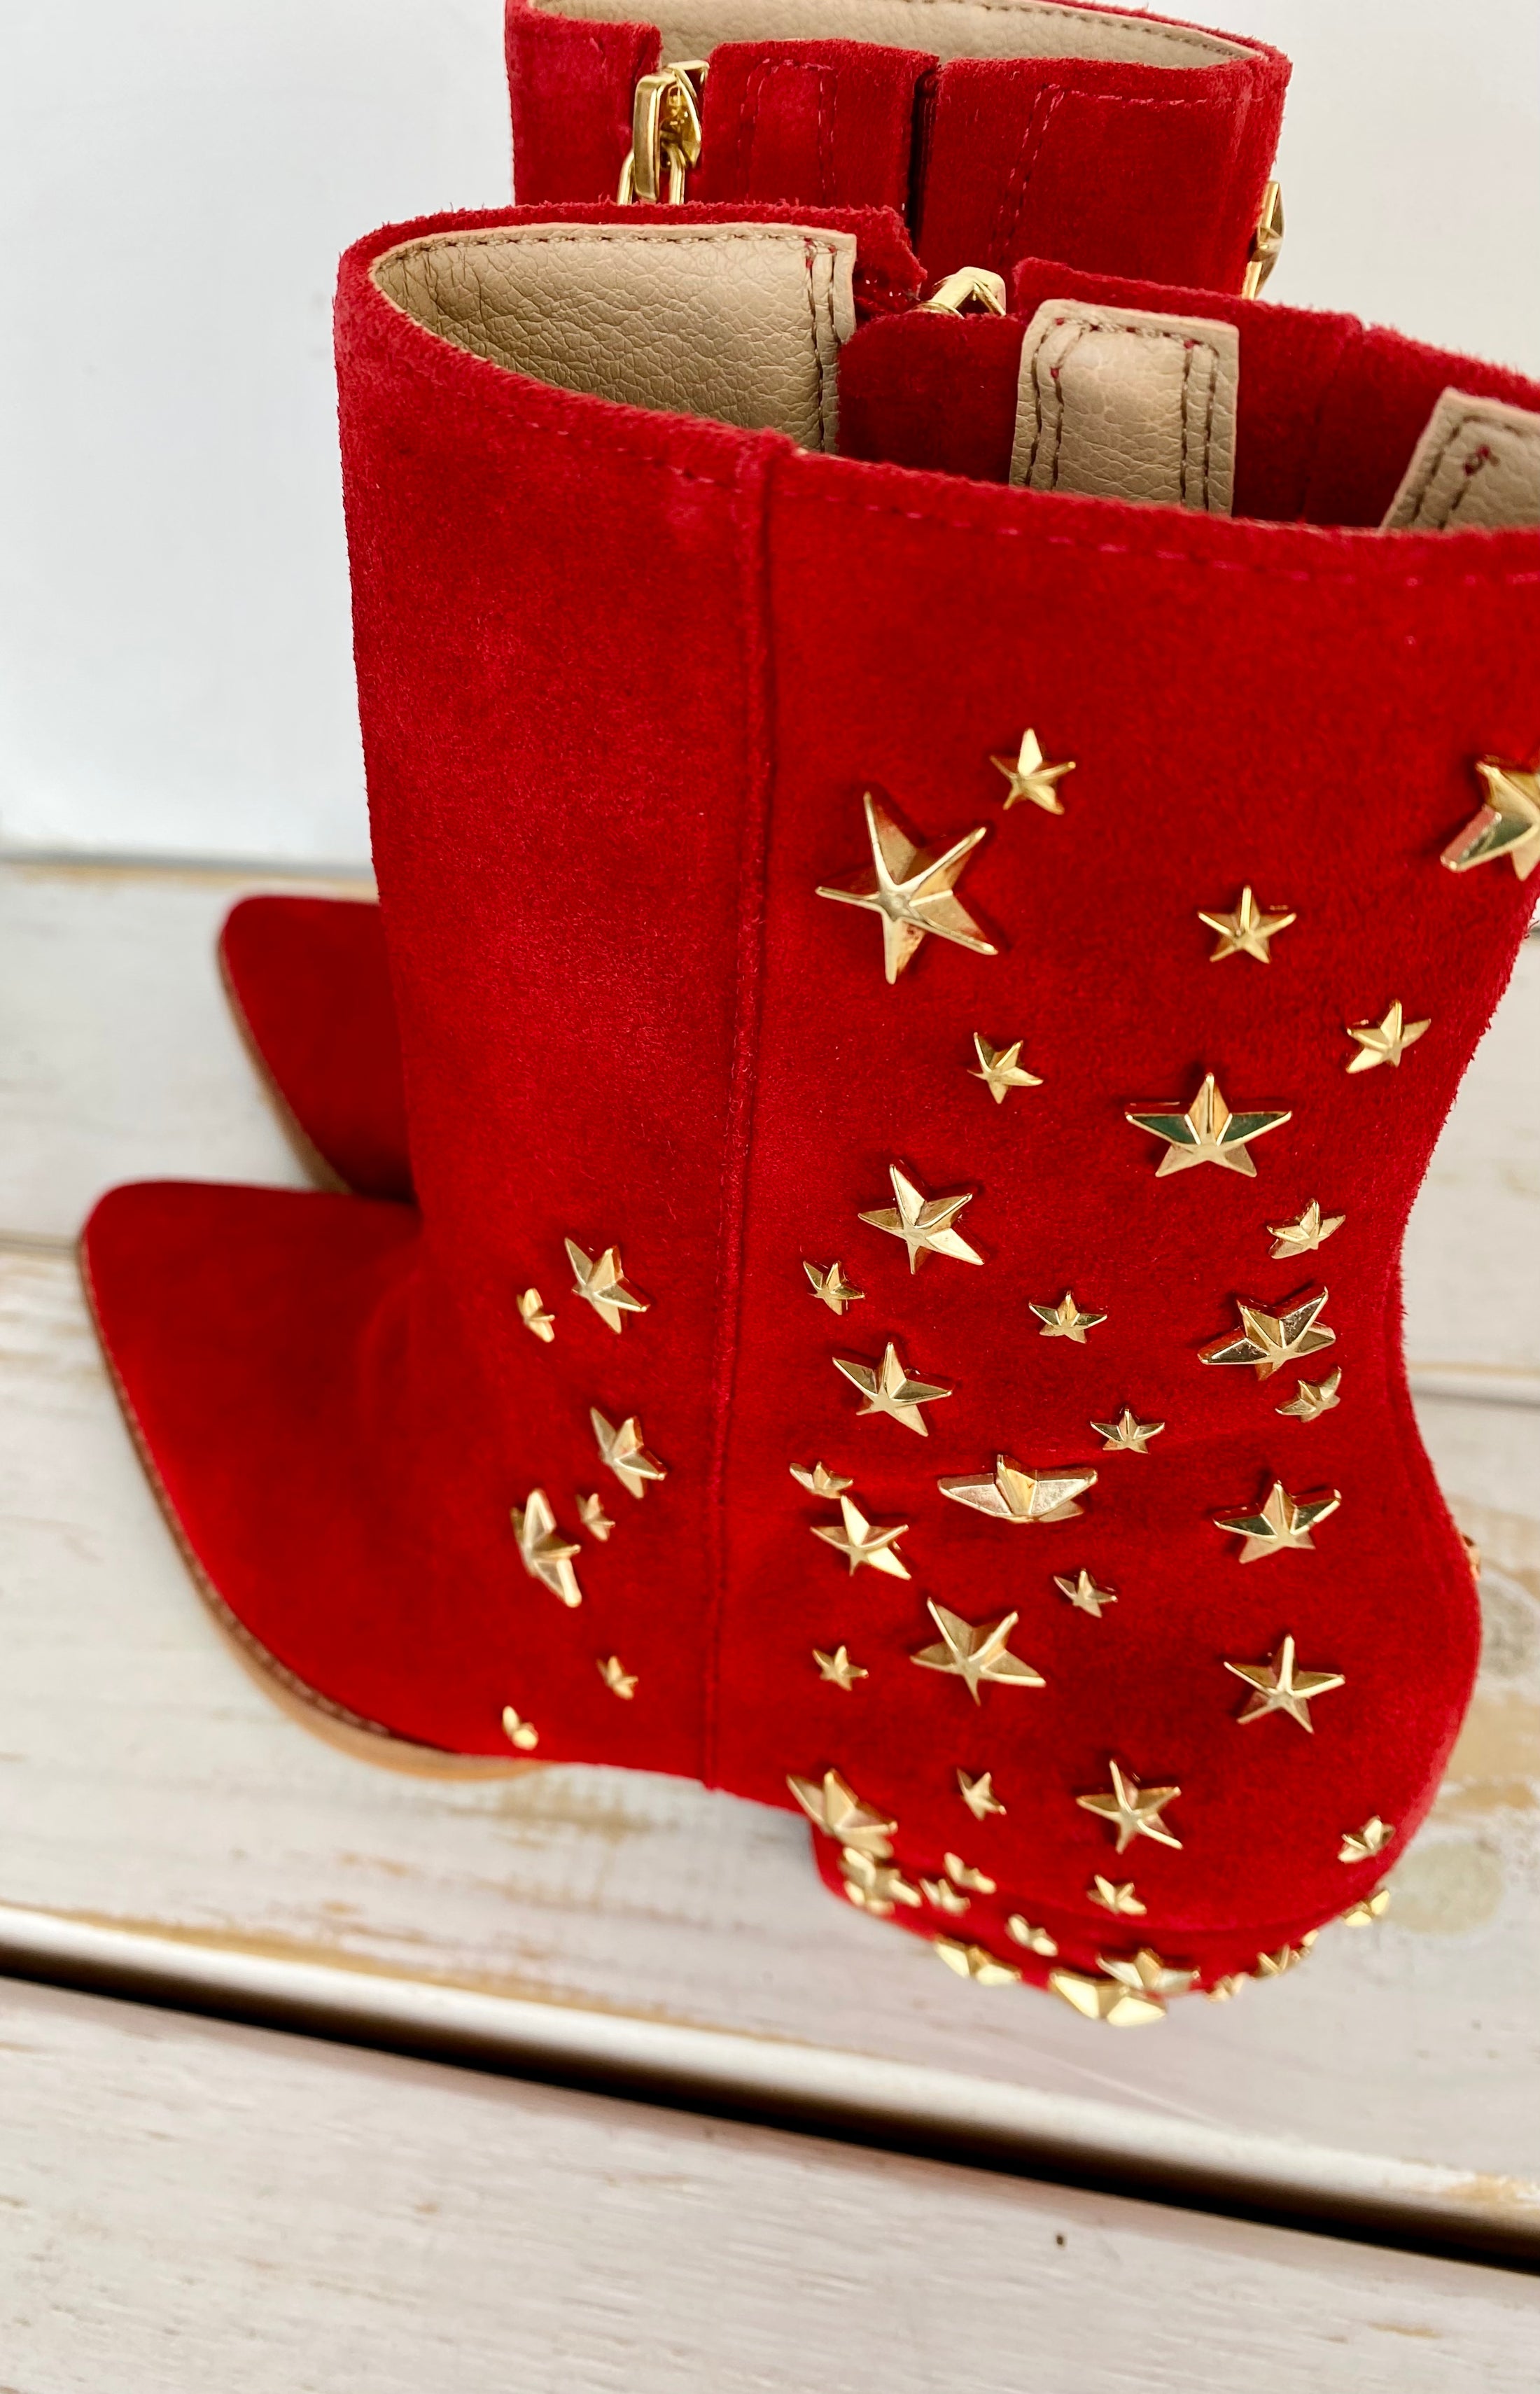 Matisse Red Boots with Gold Star details